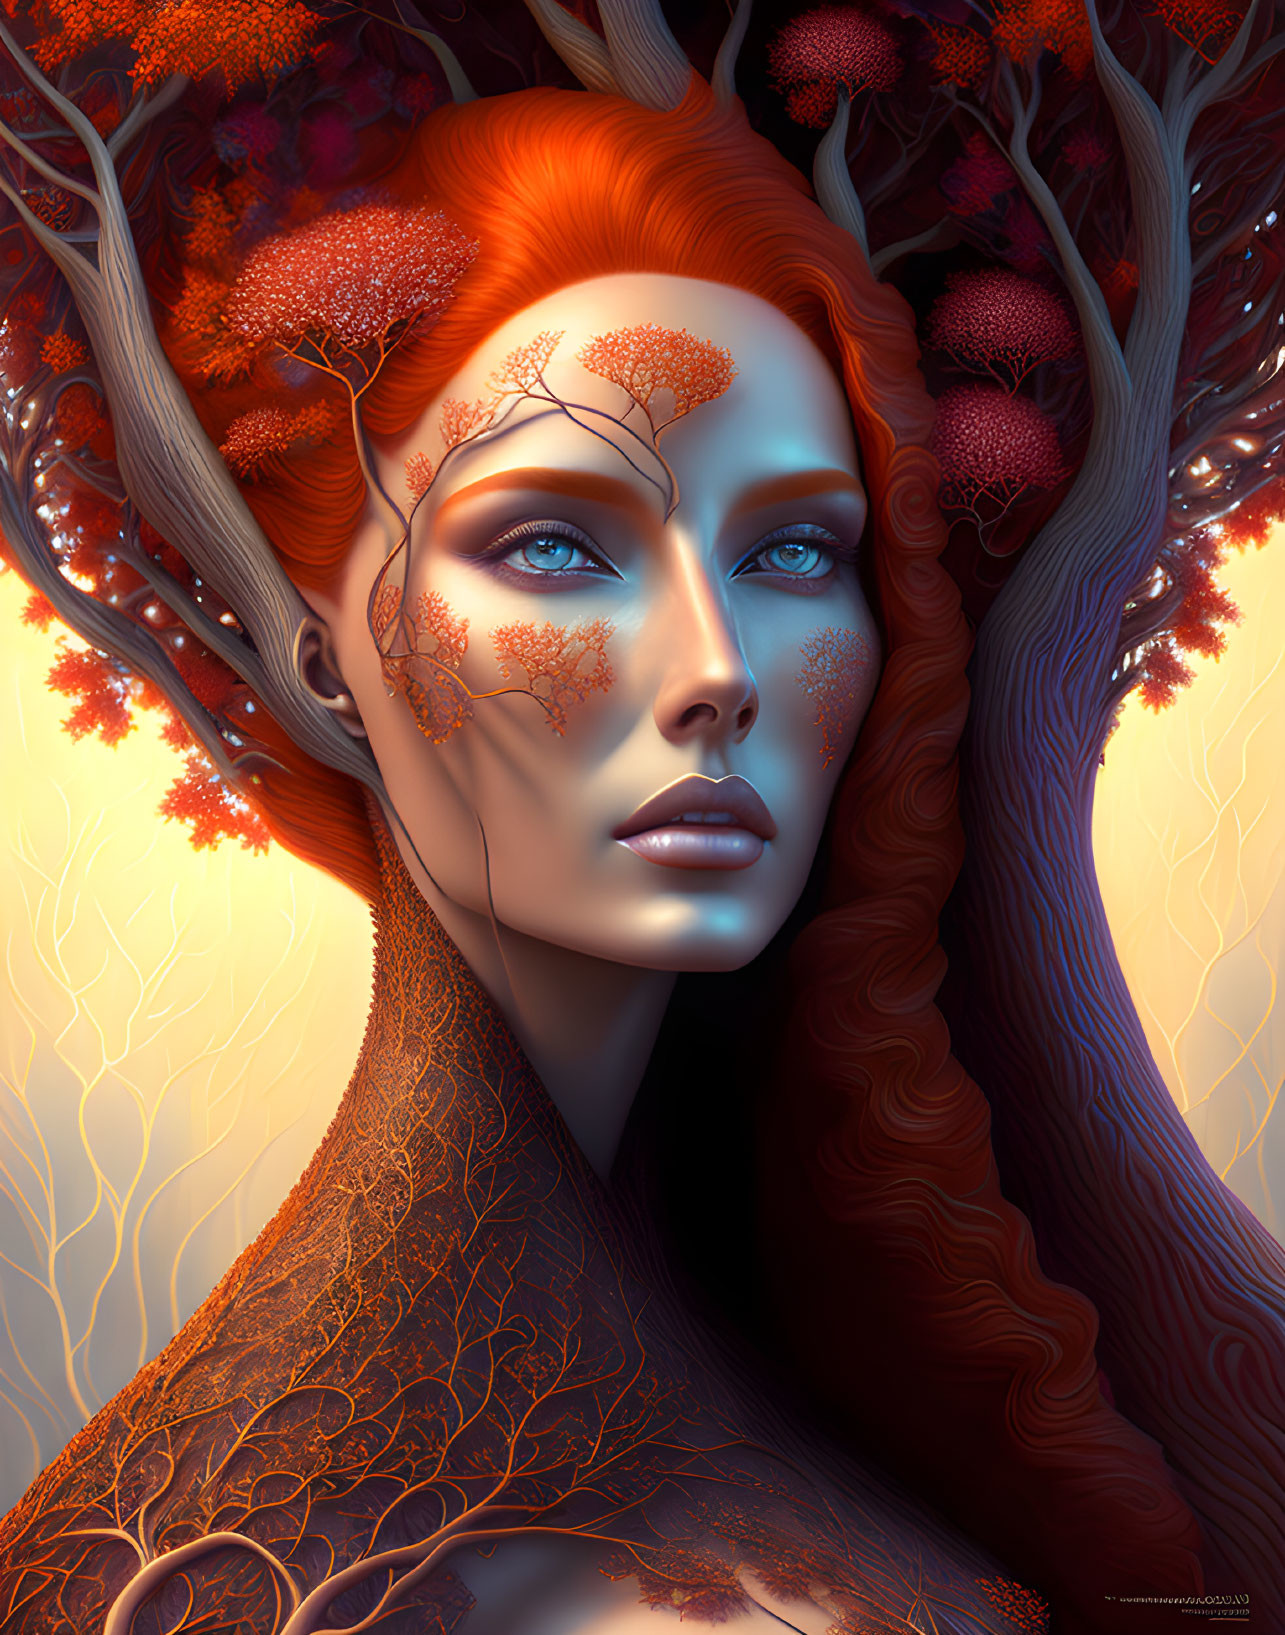 Surreal portrait of a woman with tree branches for hair and autumn leaves